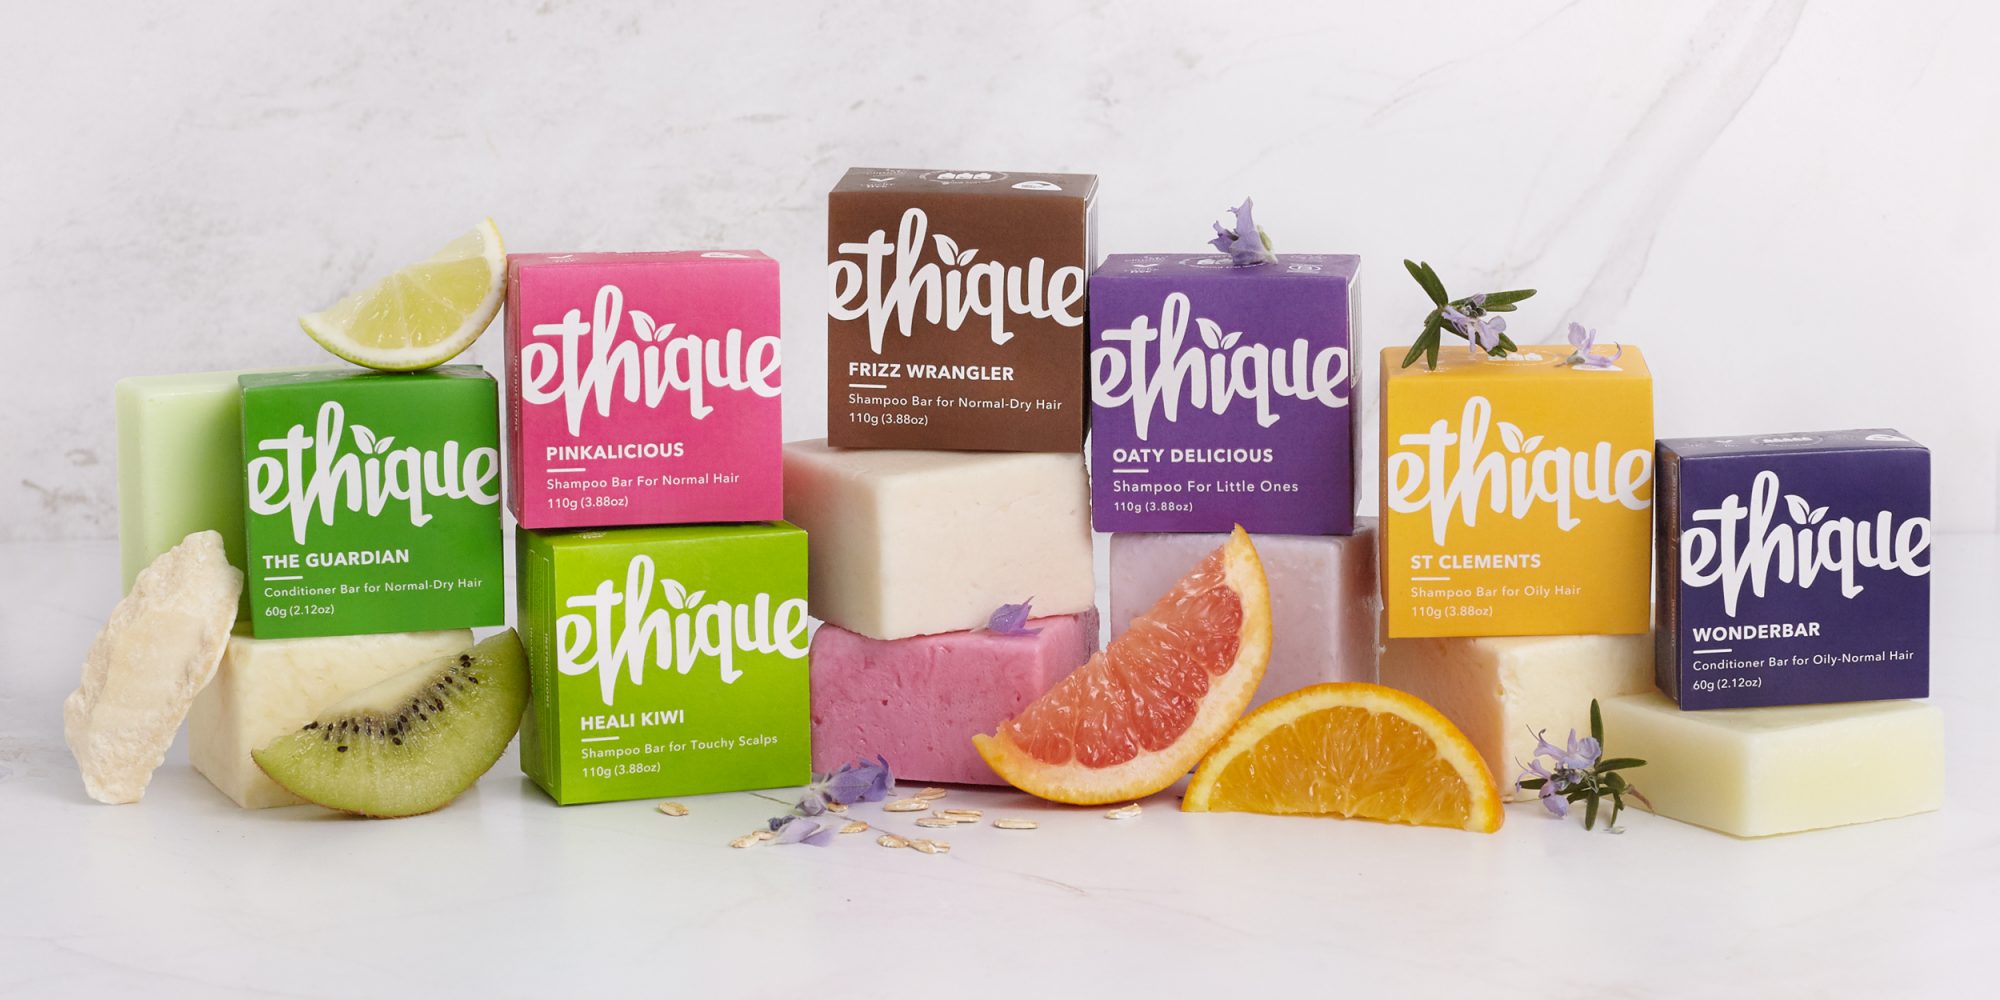 Ethique Is Leading The Plastic-Free Beauty Movement Around The World